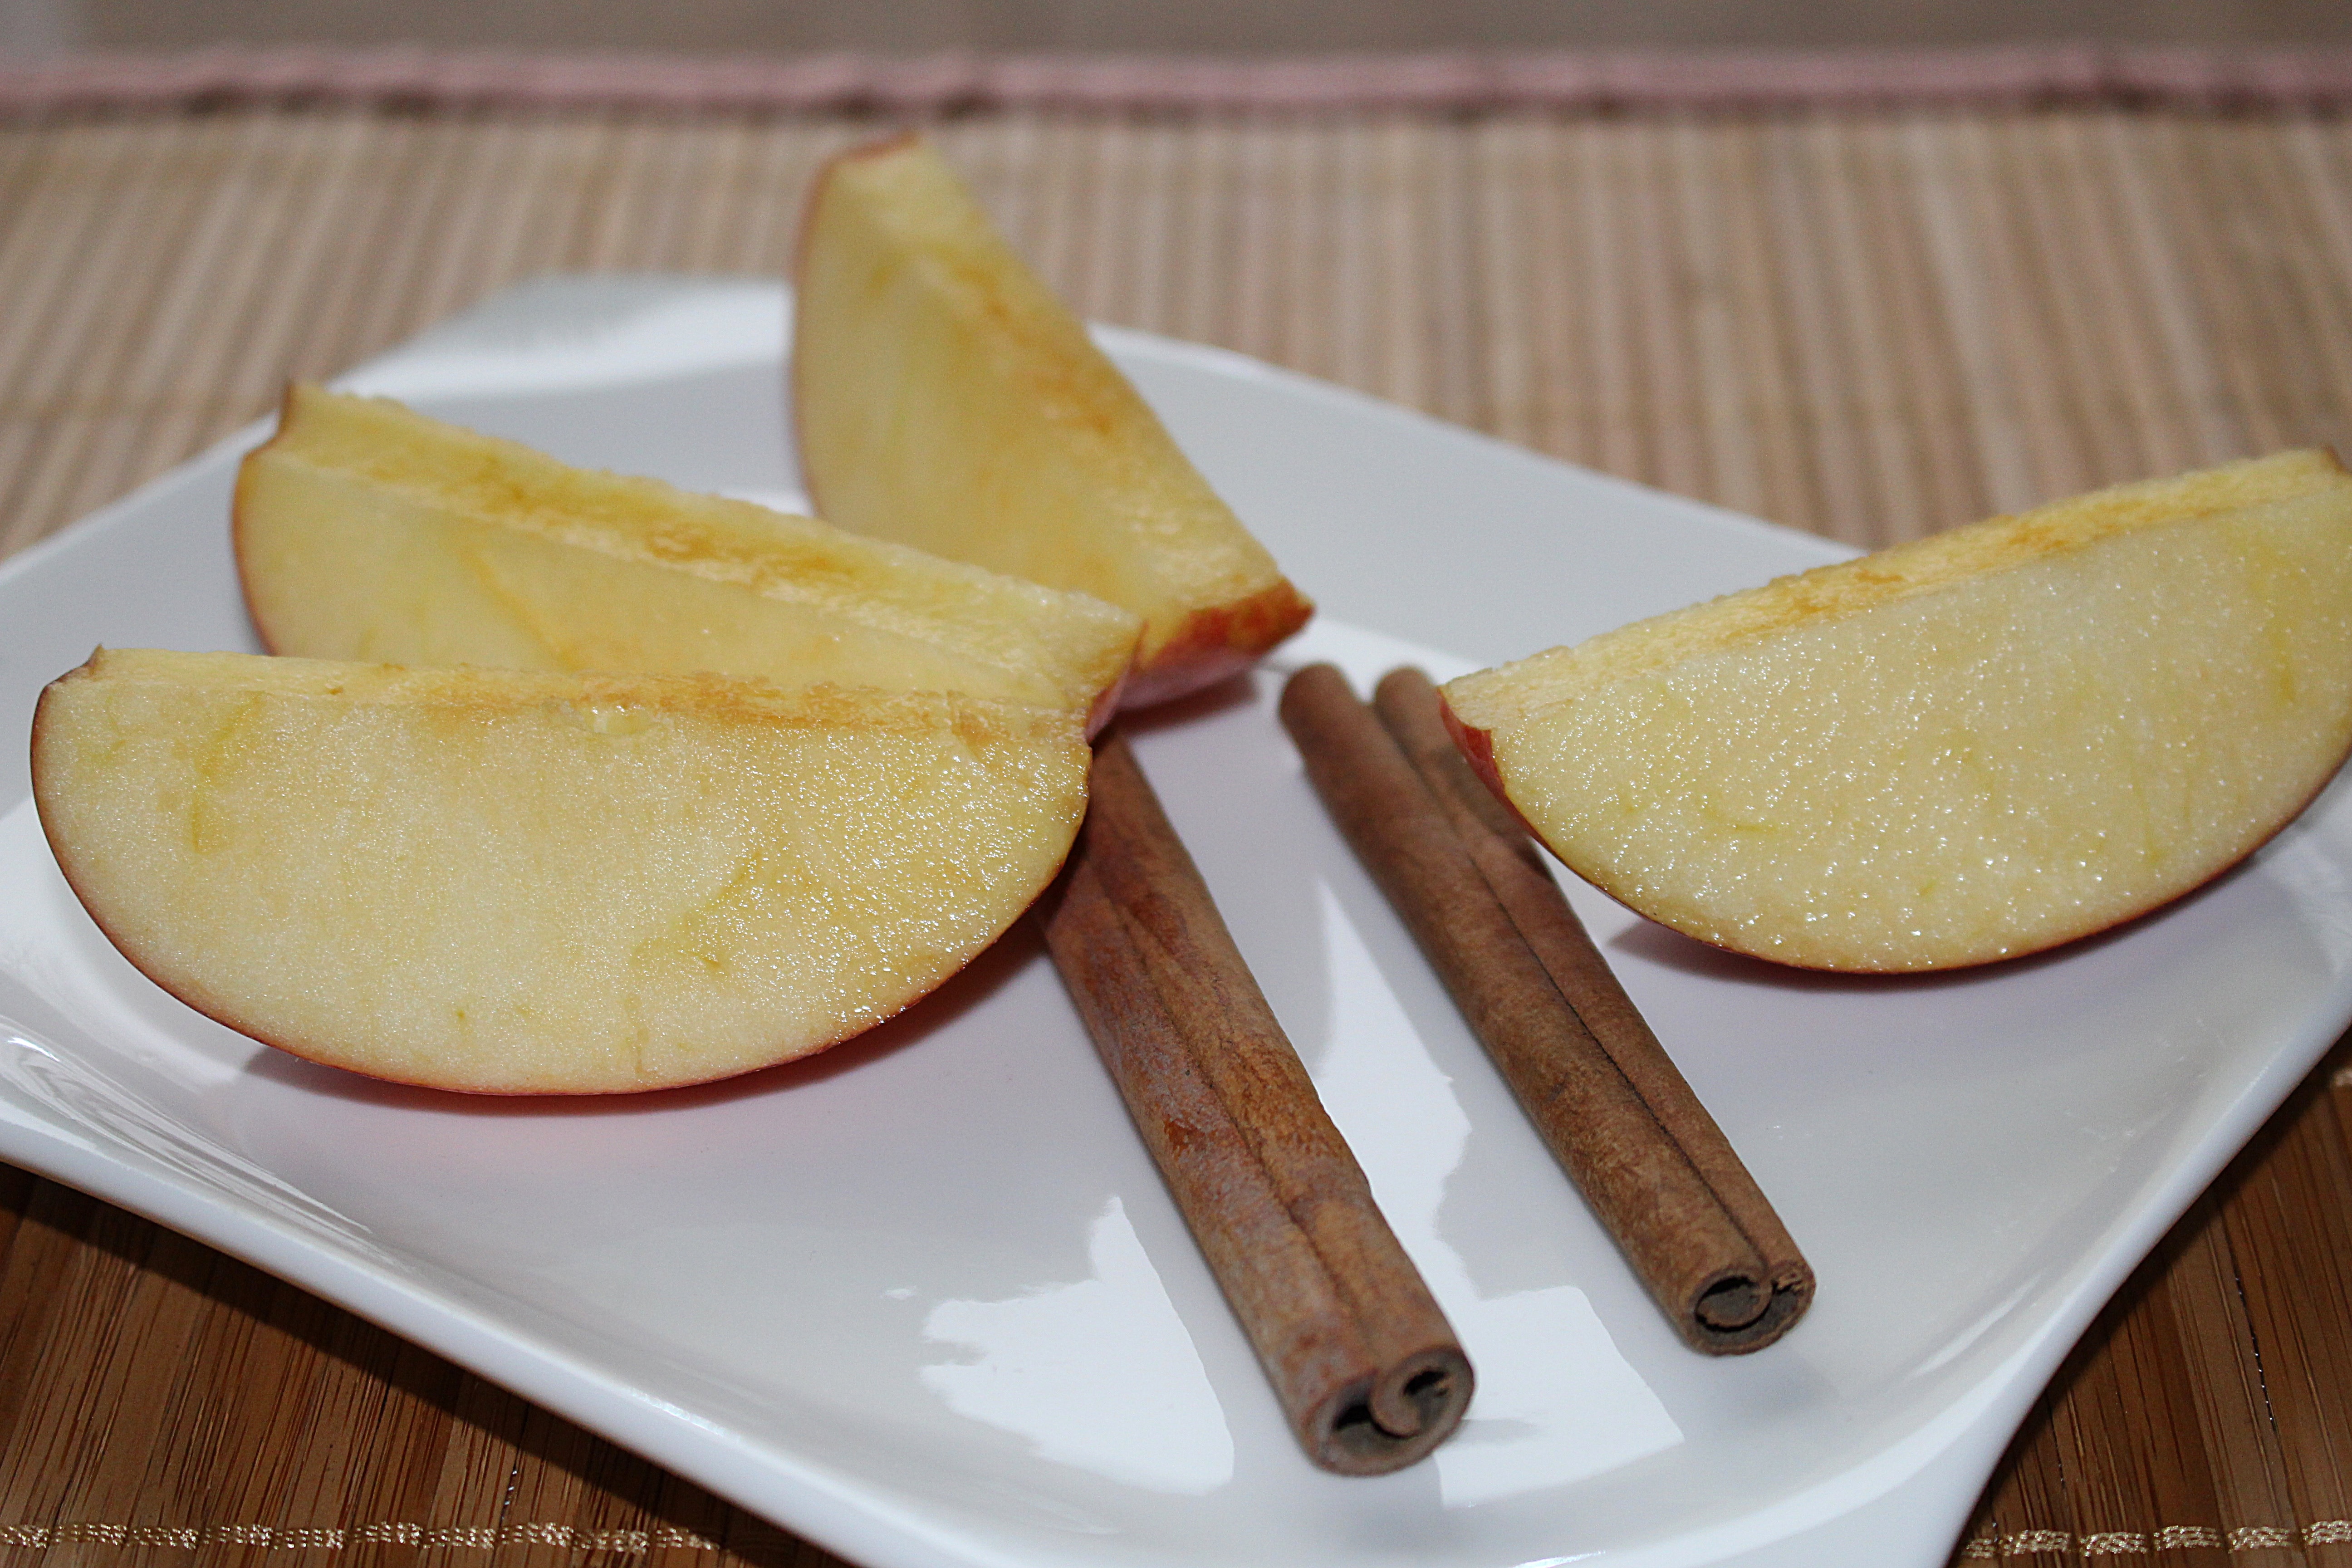 sliced apple and two pretzel rods